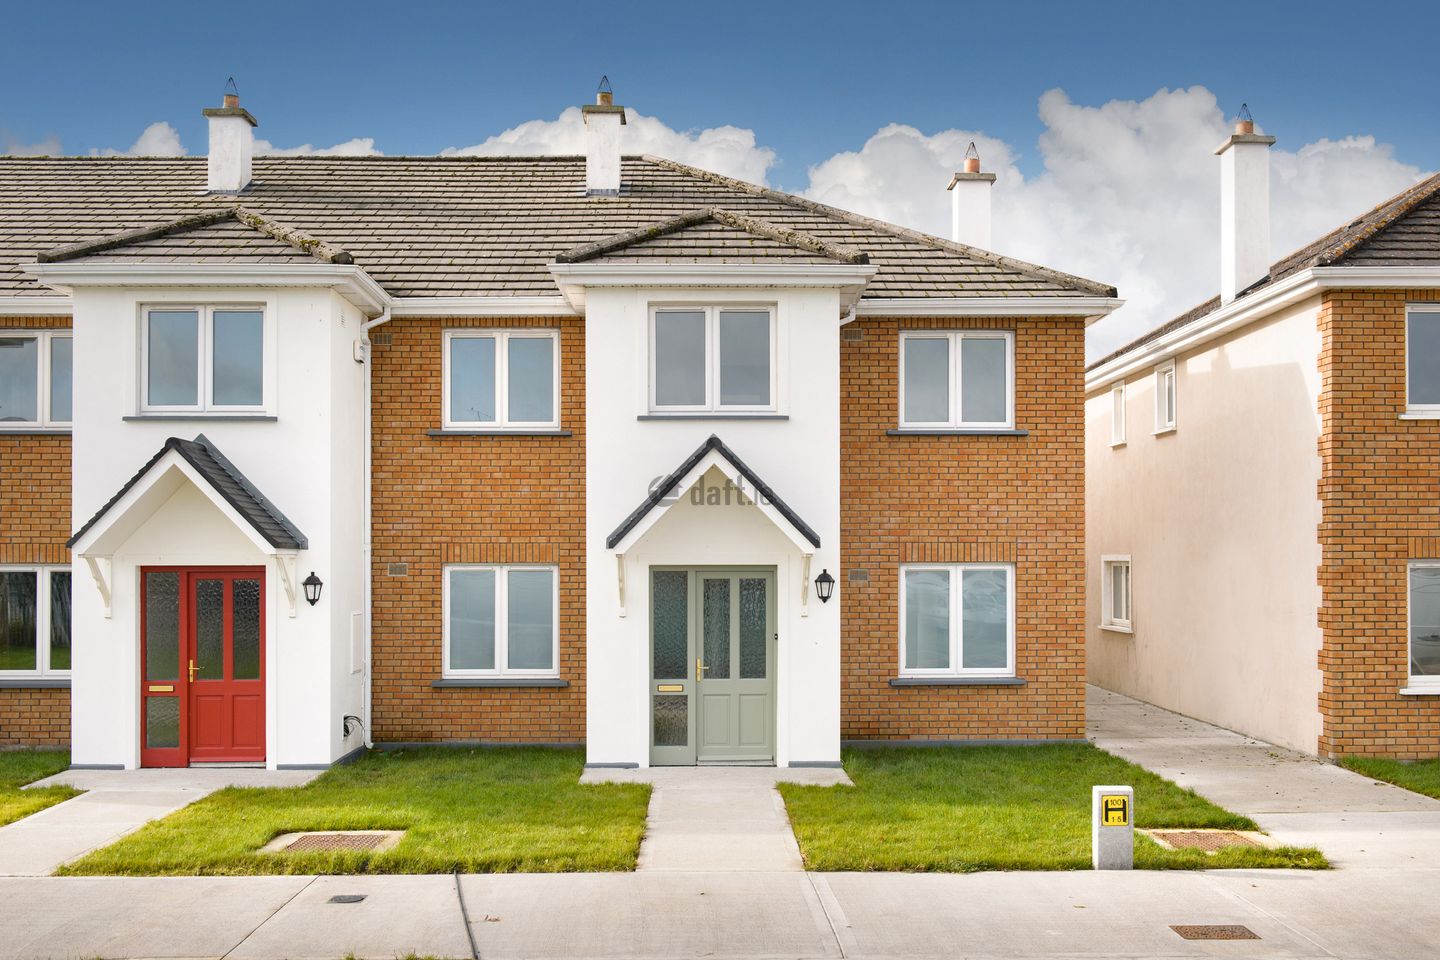 6 Deanswood, Borris-in-Ossory, Co. Laois